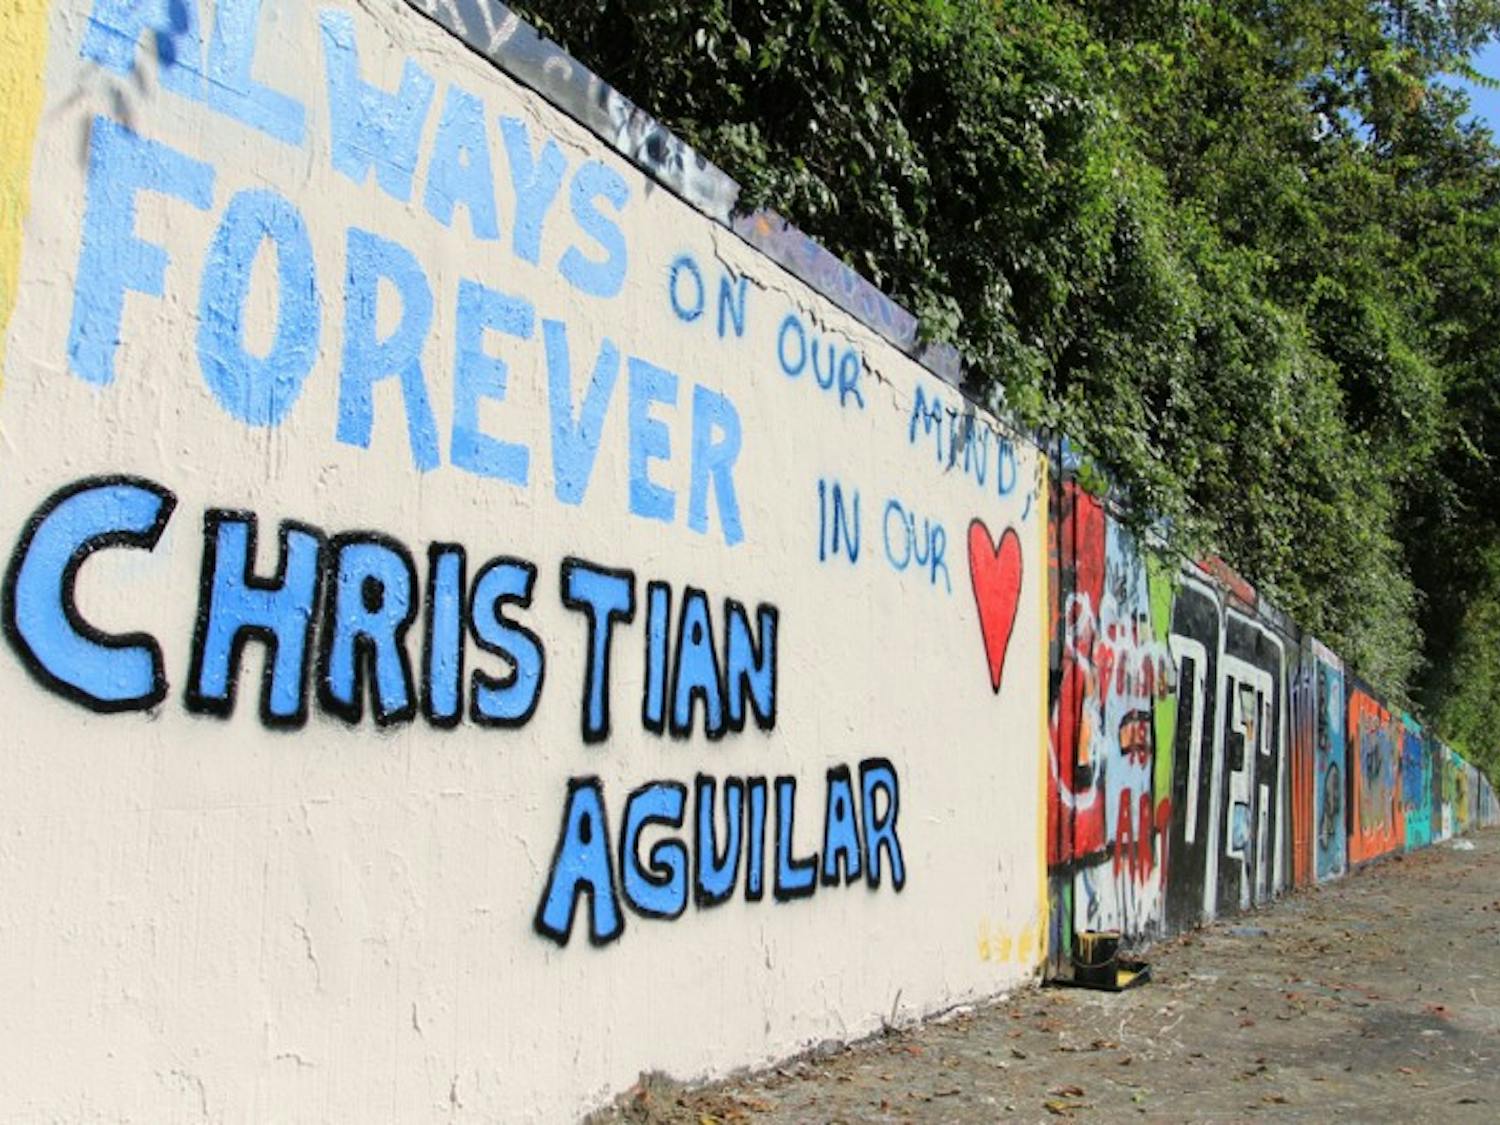 Supporters of the Aguilar family painted a memorial to Christian Aguilar on the 34th Street Wall on Saturday afternoon.